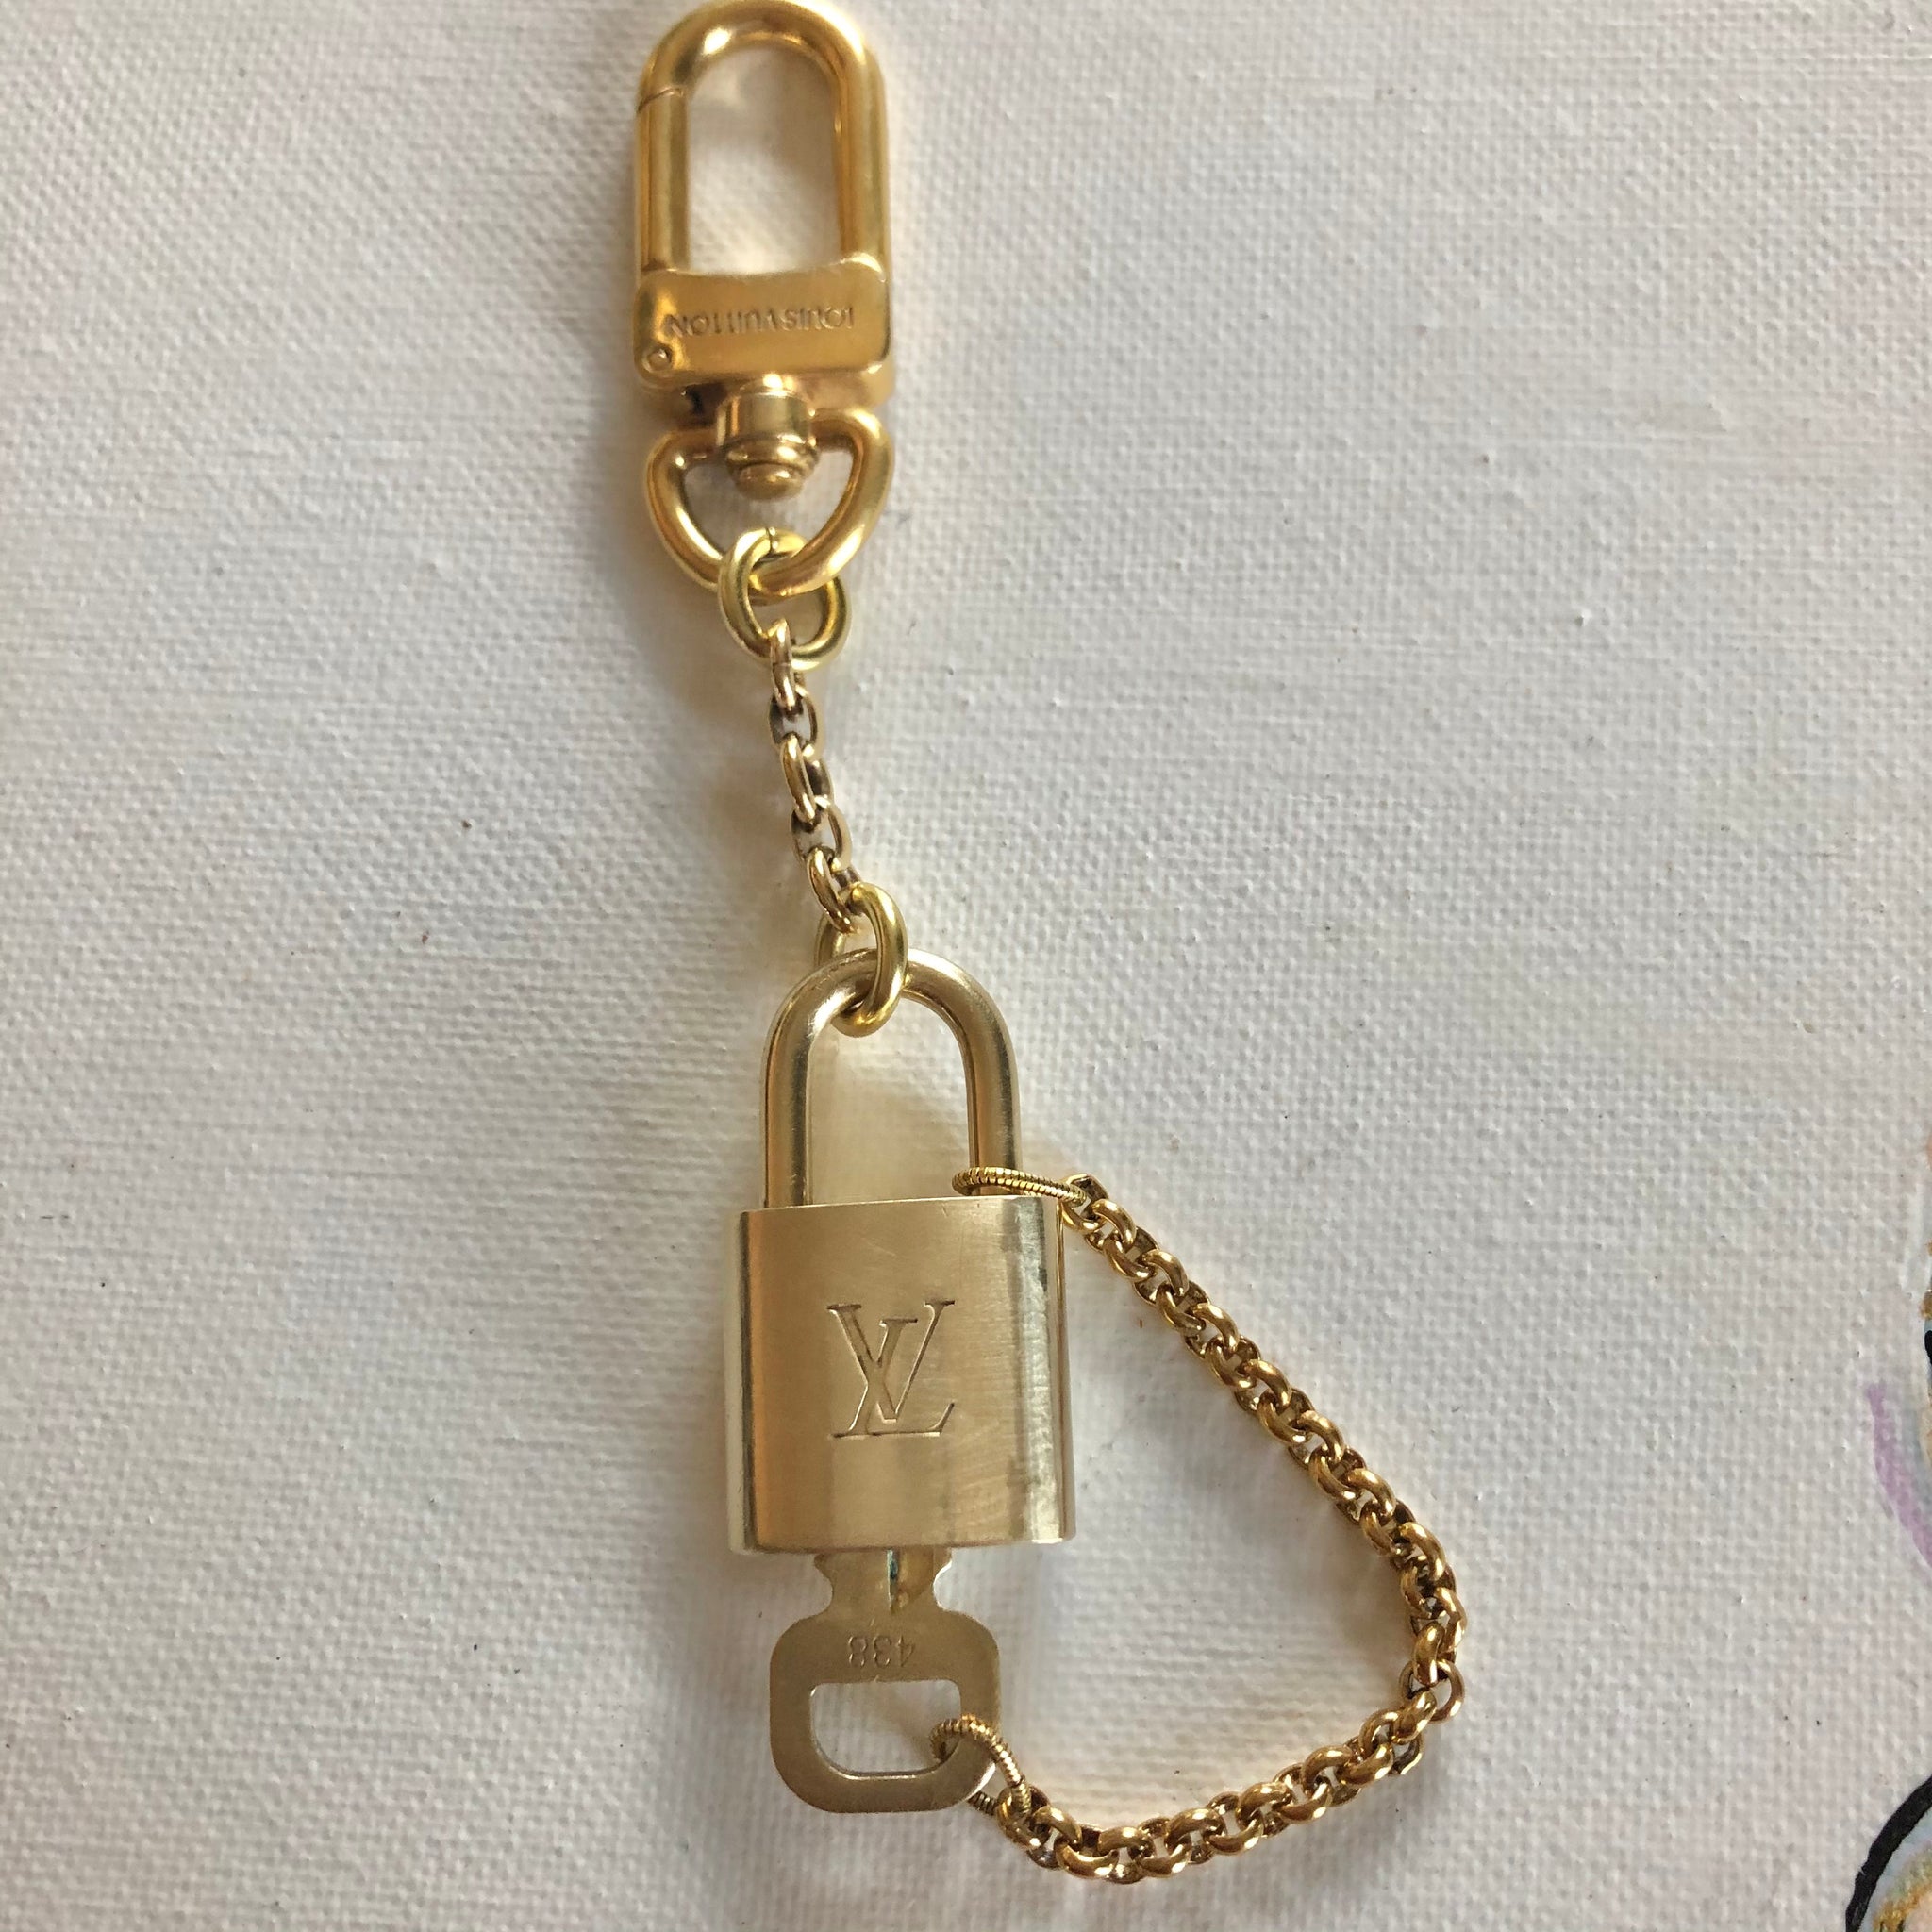 New Authentic Louis Vuitton PadLock Lock & Key for Bags Gold # 677